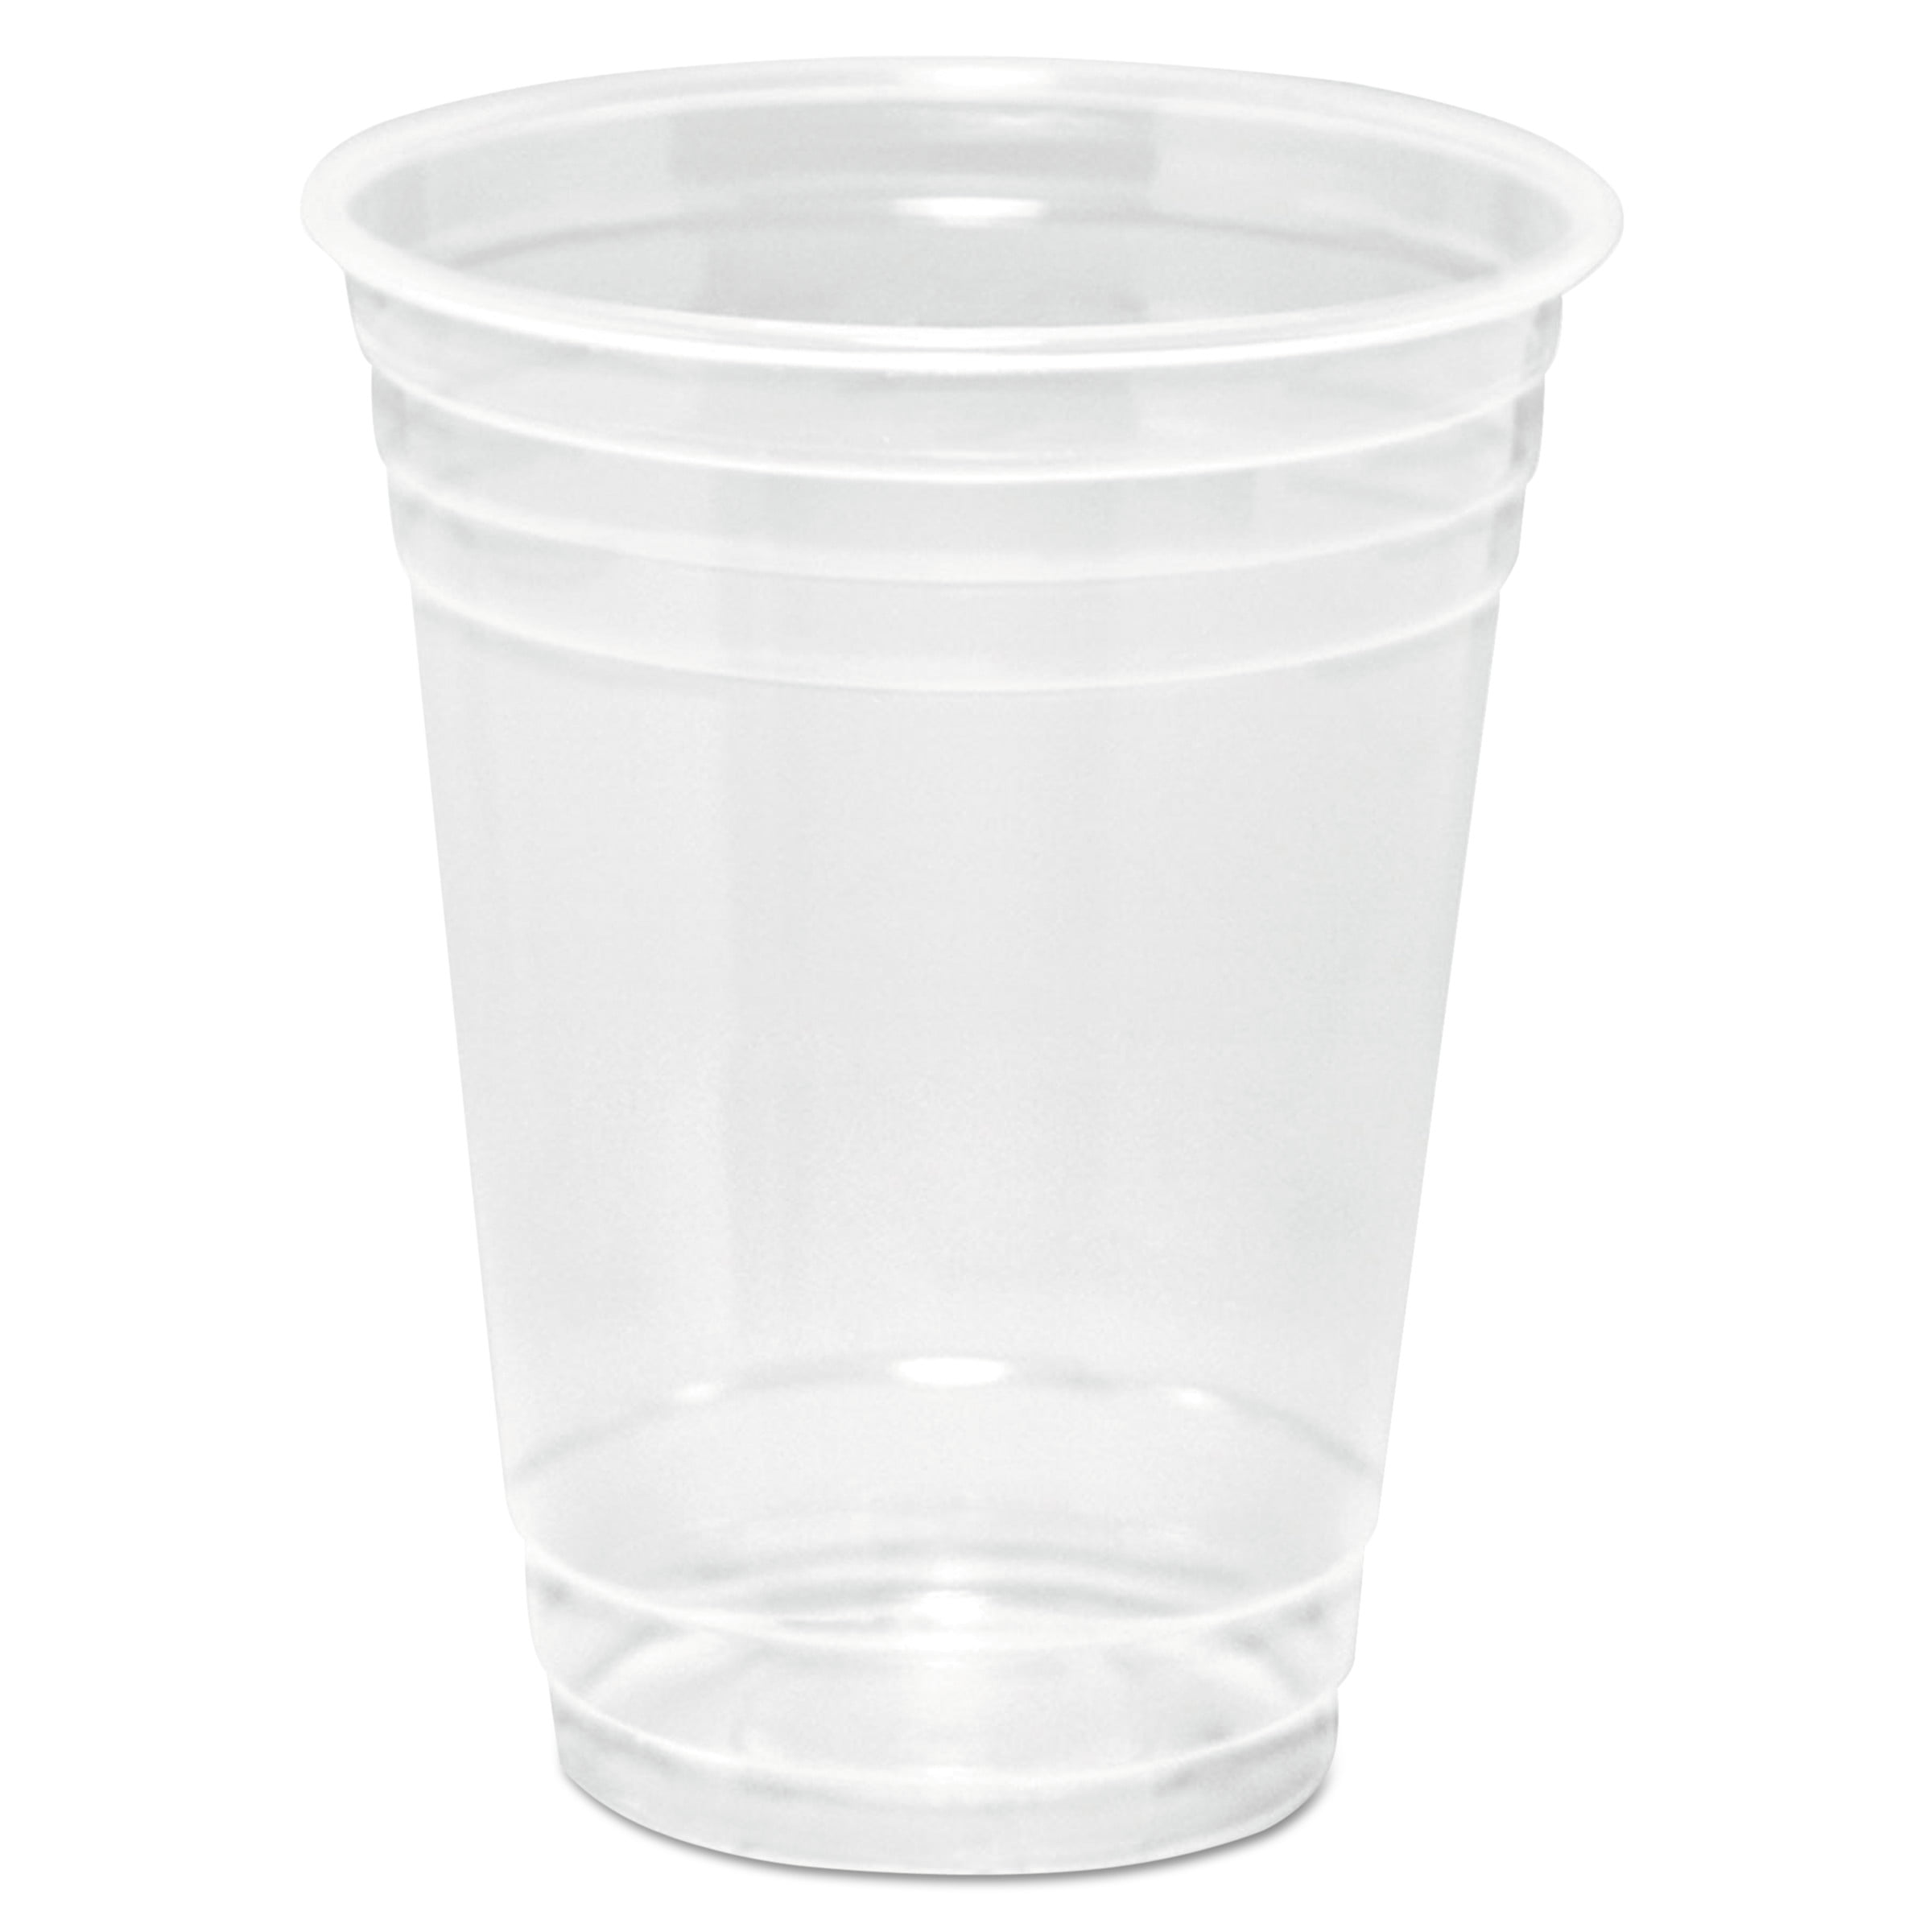 DART 16PX Disposable Cold Cup,16 oz.,Clear,PK1000 